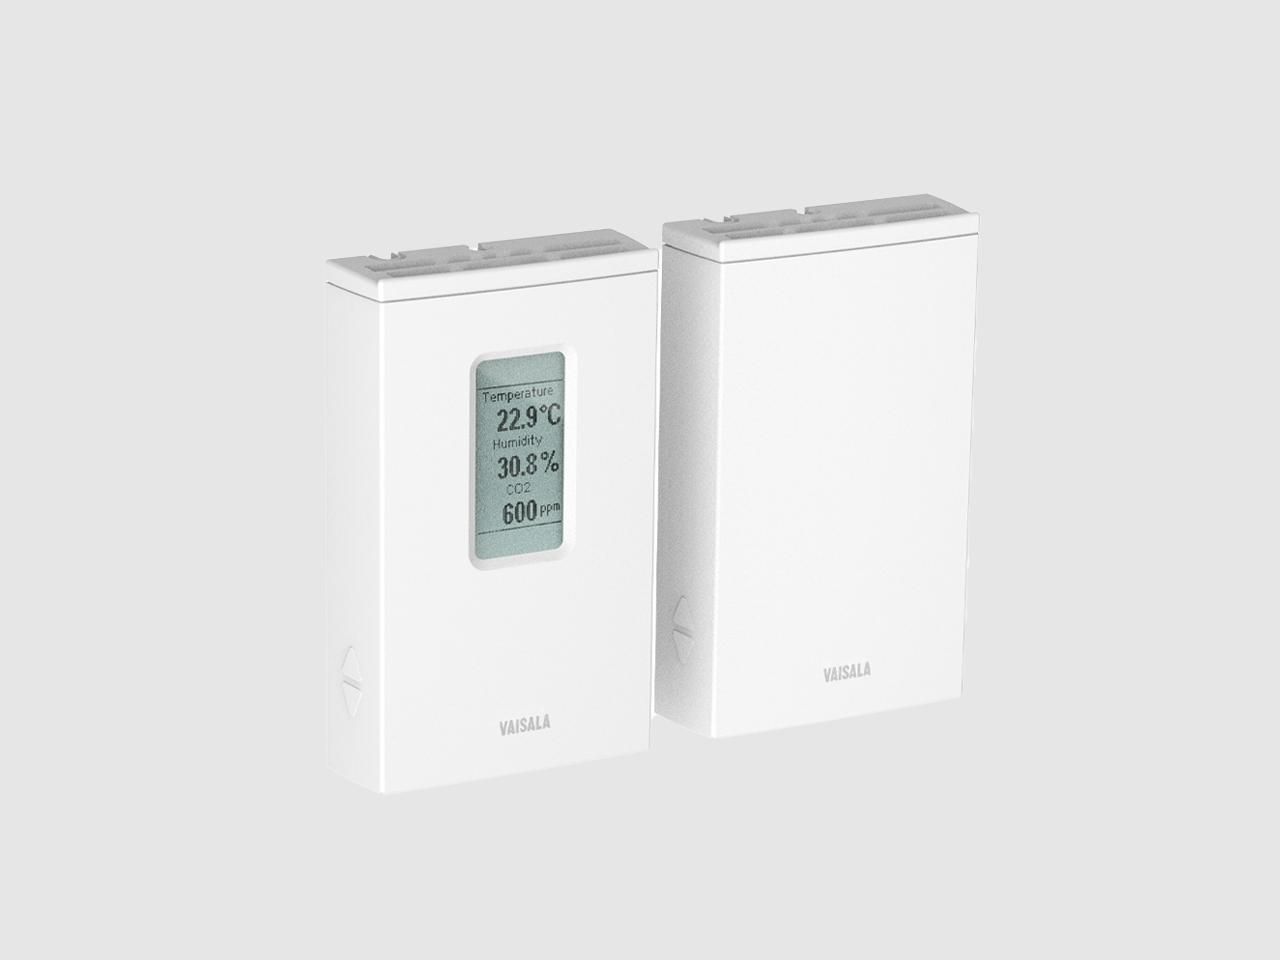 Wall-mounted Vaisala GMW90 Series Carbon Dioxide, Temperature and Humidity Transmitters are especially suited for green building projects and DCV.